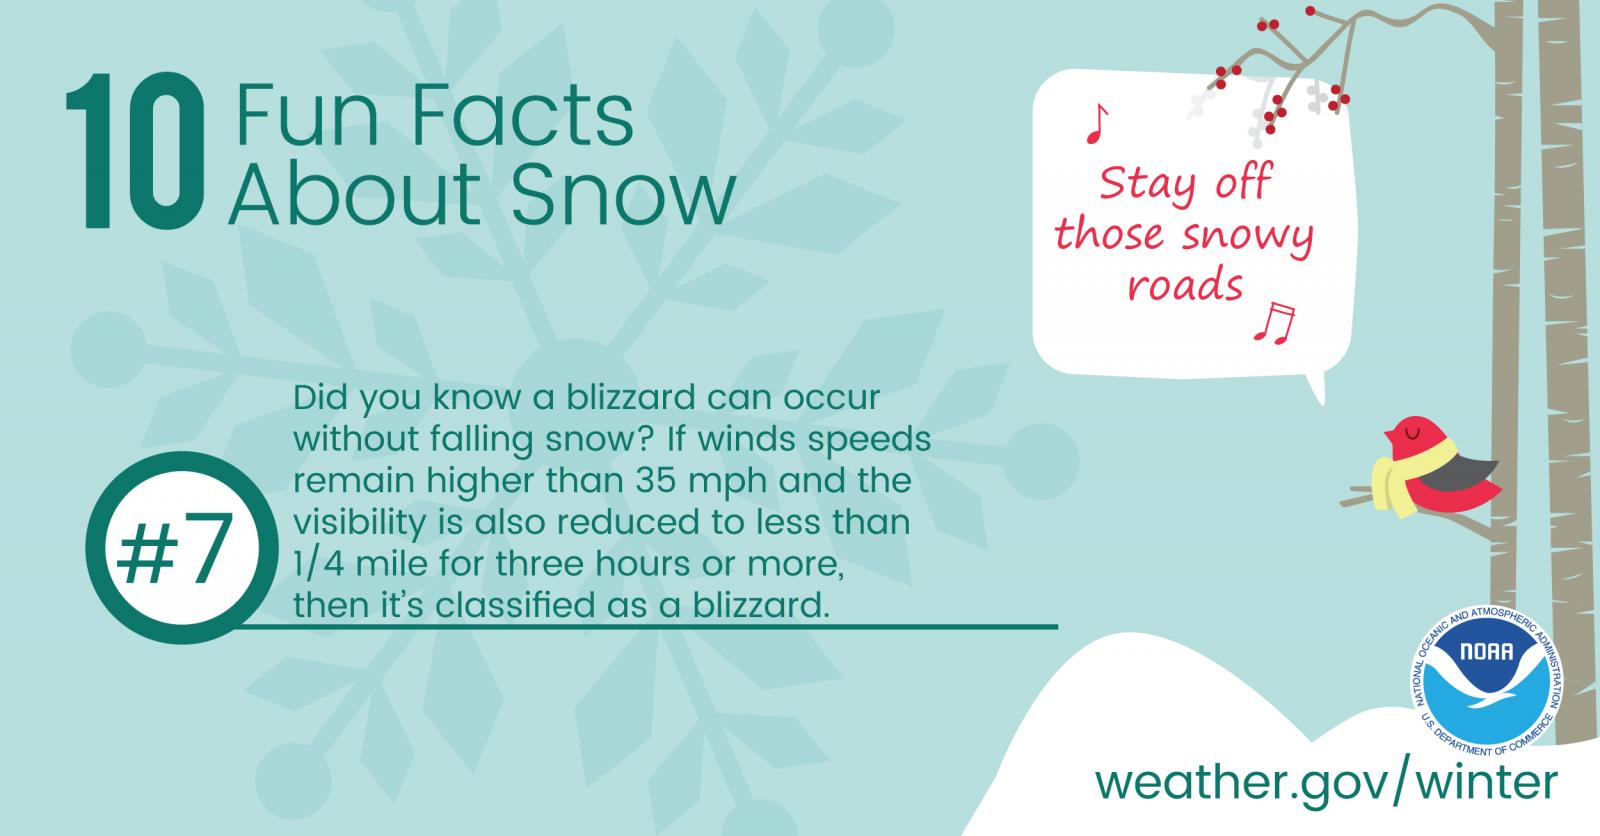 10 Fun Facts About Snow: #7. Did you know a blizzard can occur without falling snow? If wind speeds remain higher than 35 mph and the visibility is also reduced to less than 1/4 mile for three hours or more, then it's classified as a blizzard.